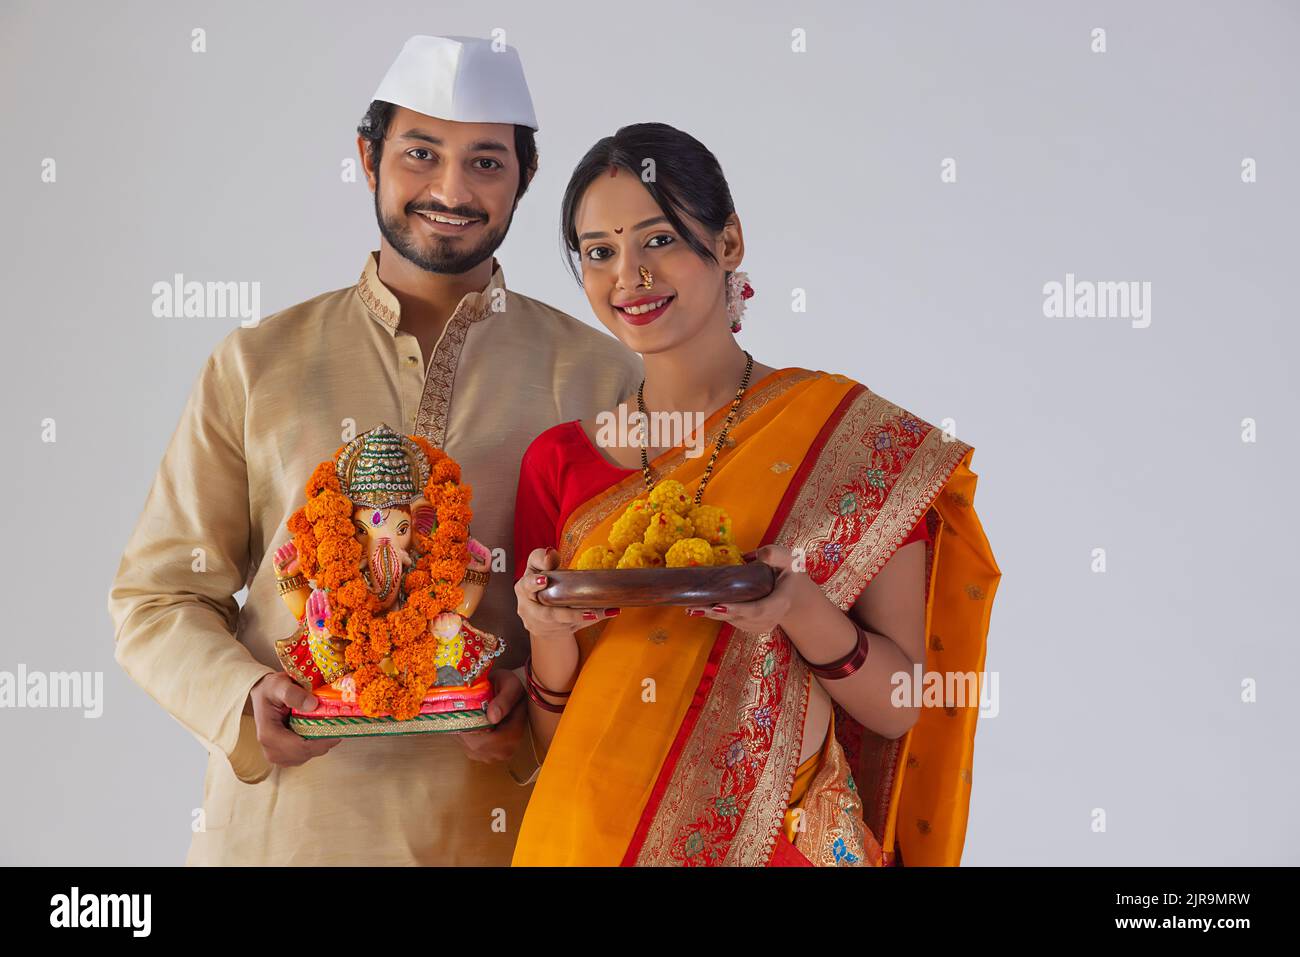 Portrait of Maharashtrian couple carrying statue of Lord Ganesh and plate of sweet food Stock Photo